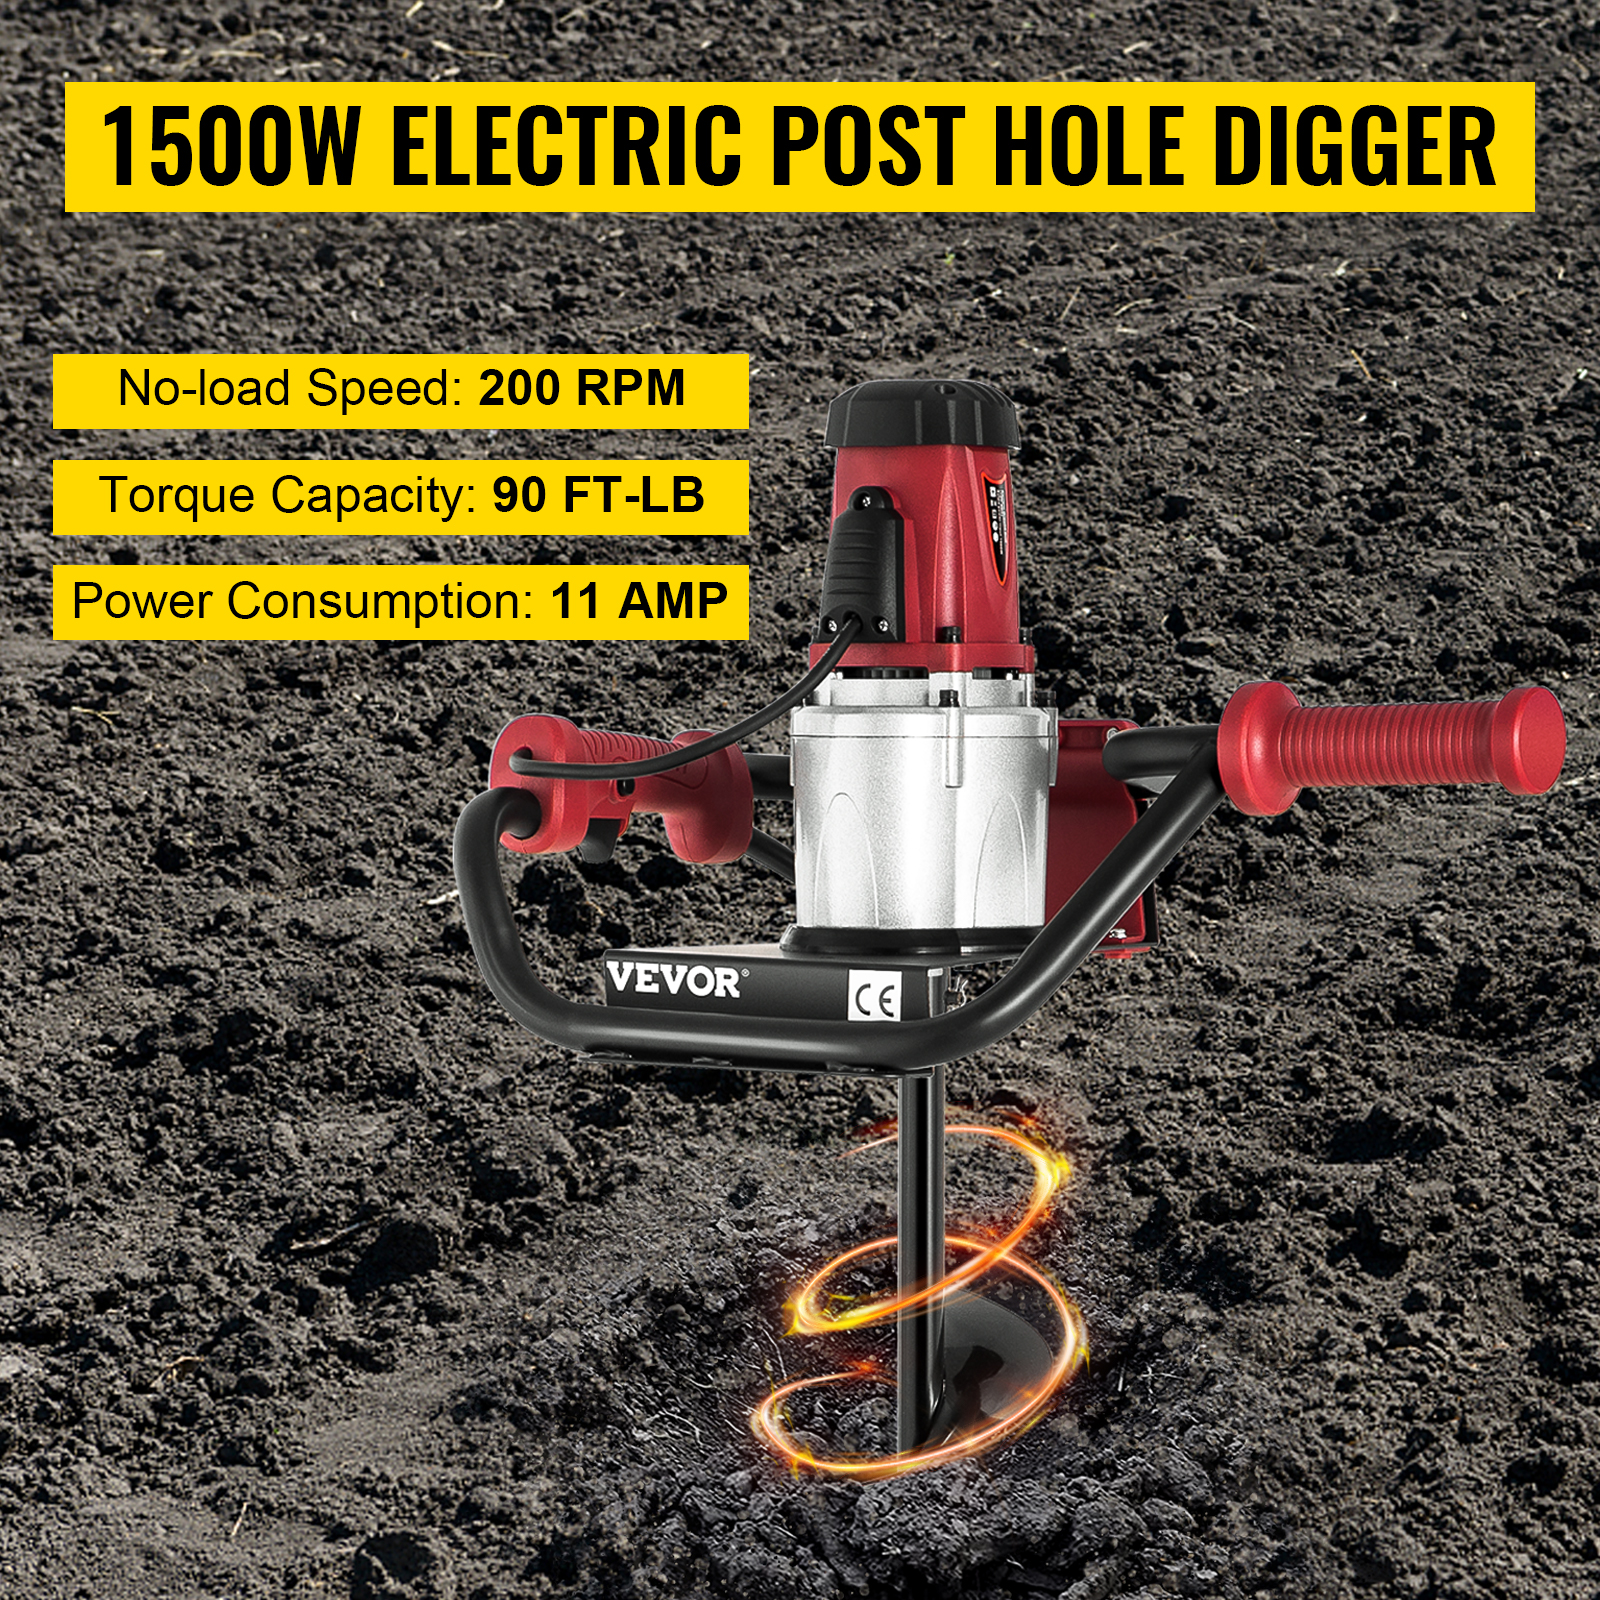 Necessities fetch Smash VEVOR Electric Post Hole Digger, 1500 W 1.6 HP Electric Auger Powerhead w/6"  Bit, 39" Drilling Depth, Compatible with Earth Auger bit or Ice Bit, for  Post Hole Digging, Drilling, Tree Planting 